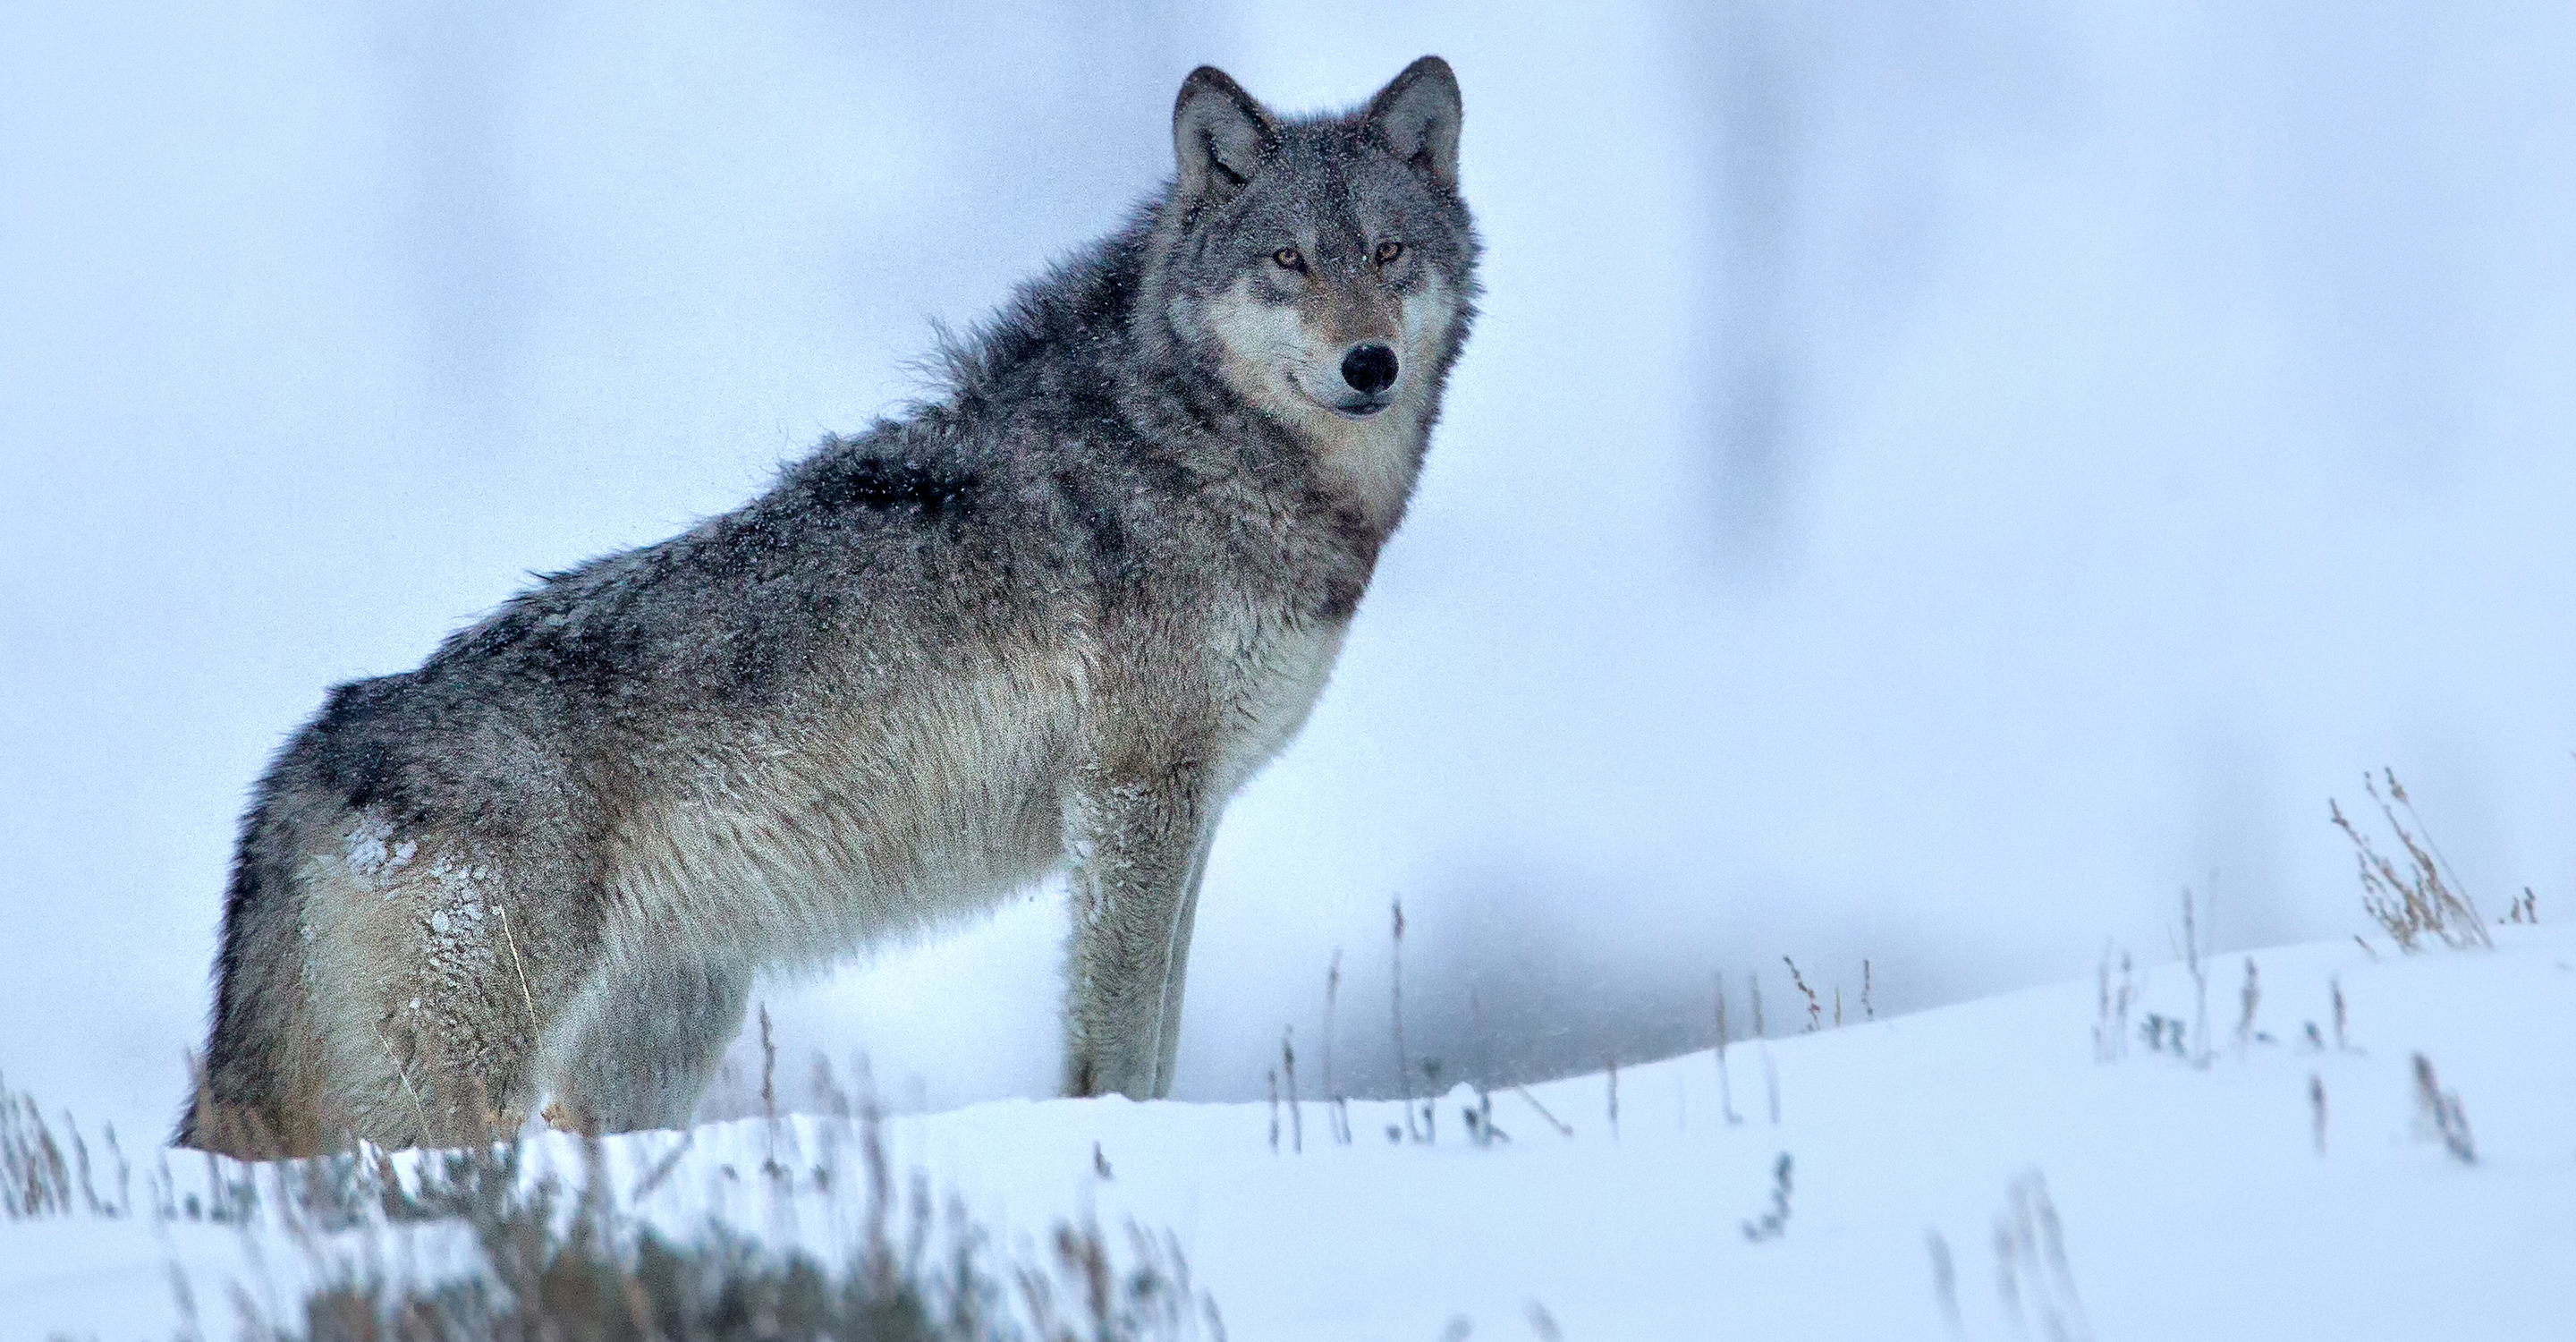 A gray wolf stands on a snowy hillside in Yellowstone National Park, United States